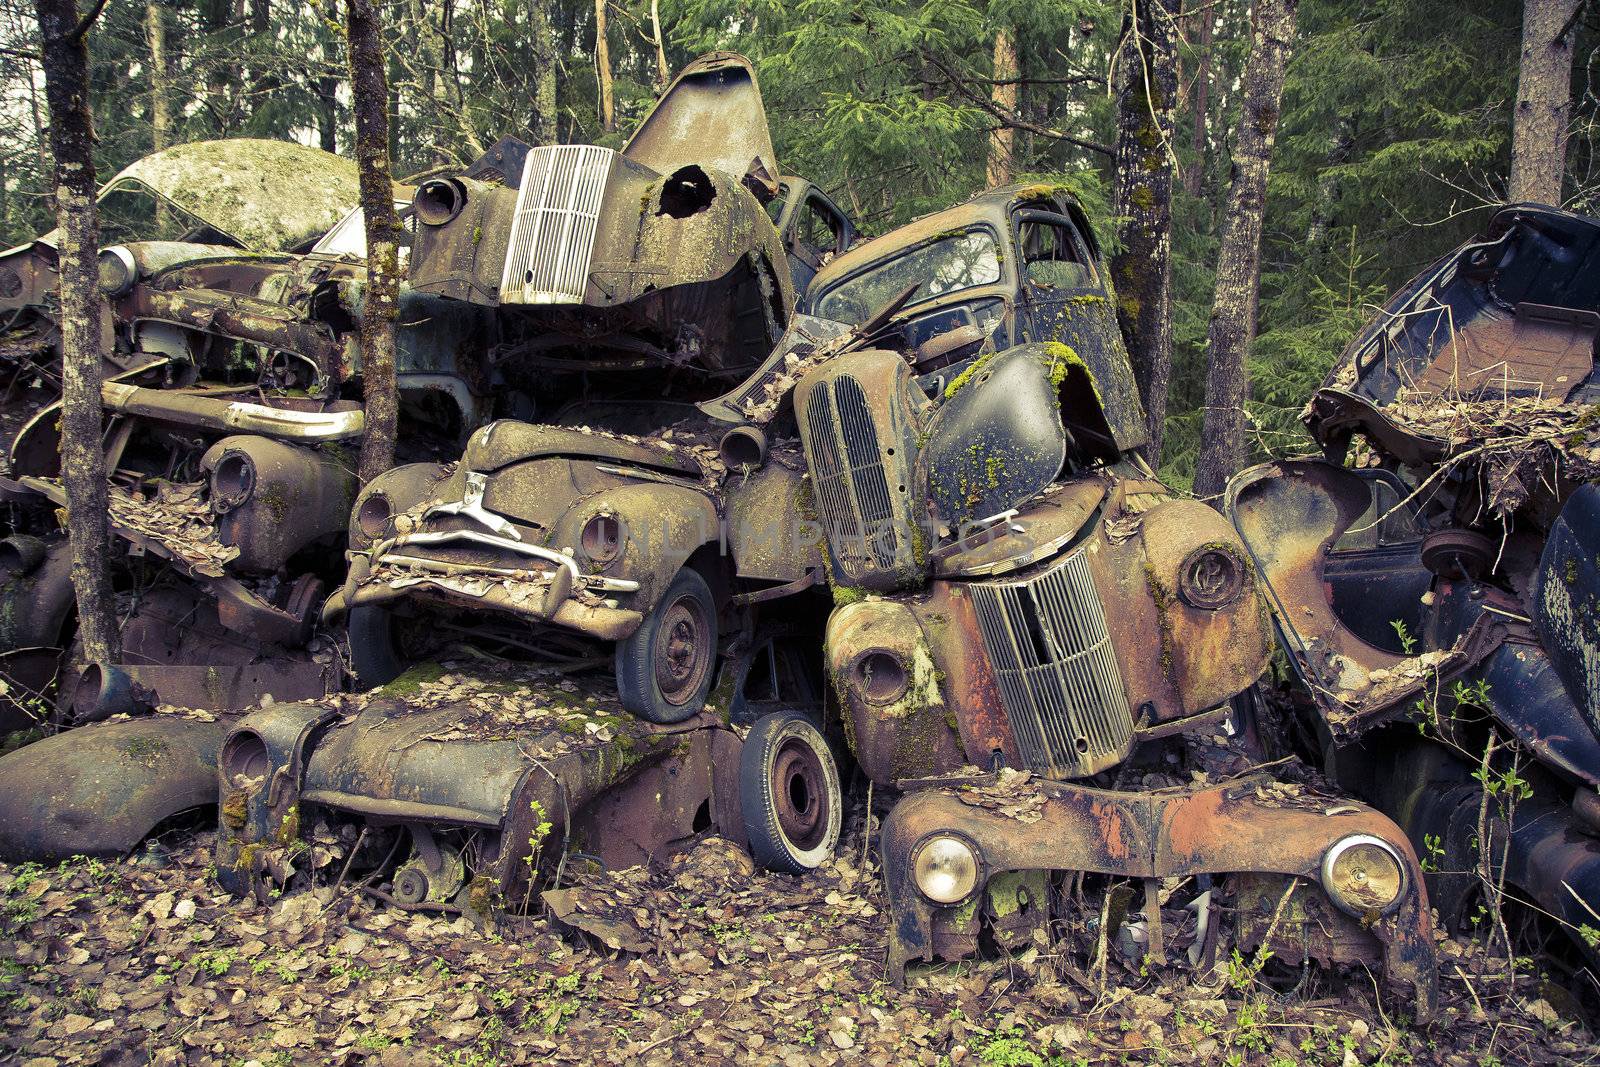 Heap of abandoned scrap cars left in the nature near the Norwegian border - Sweden. From the series Scrap in the wood. Cross processed to reflect time and age.